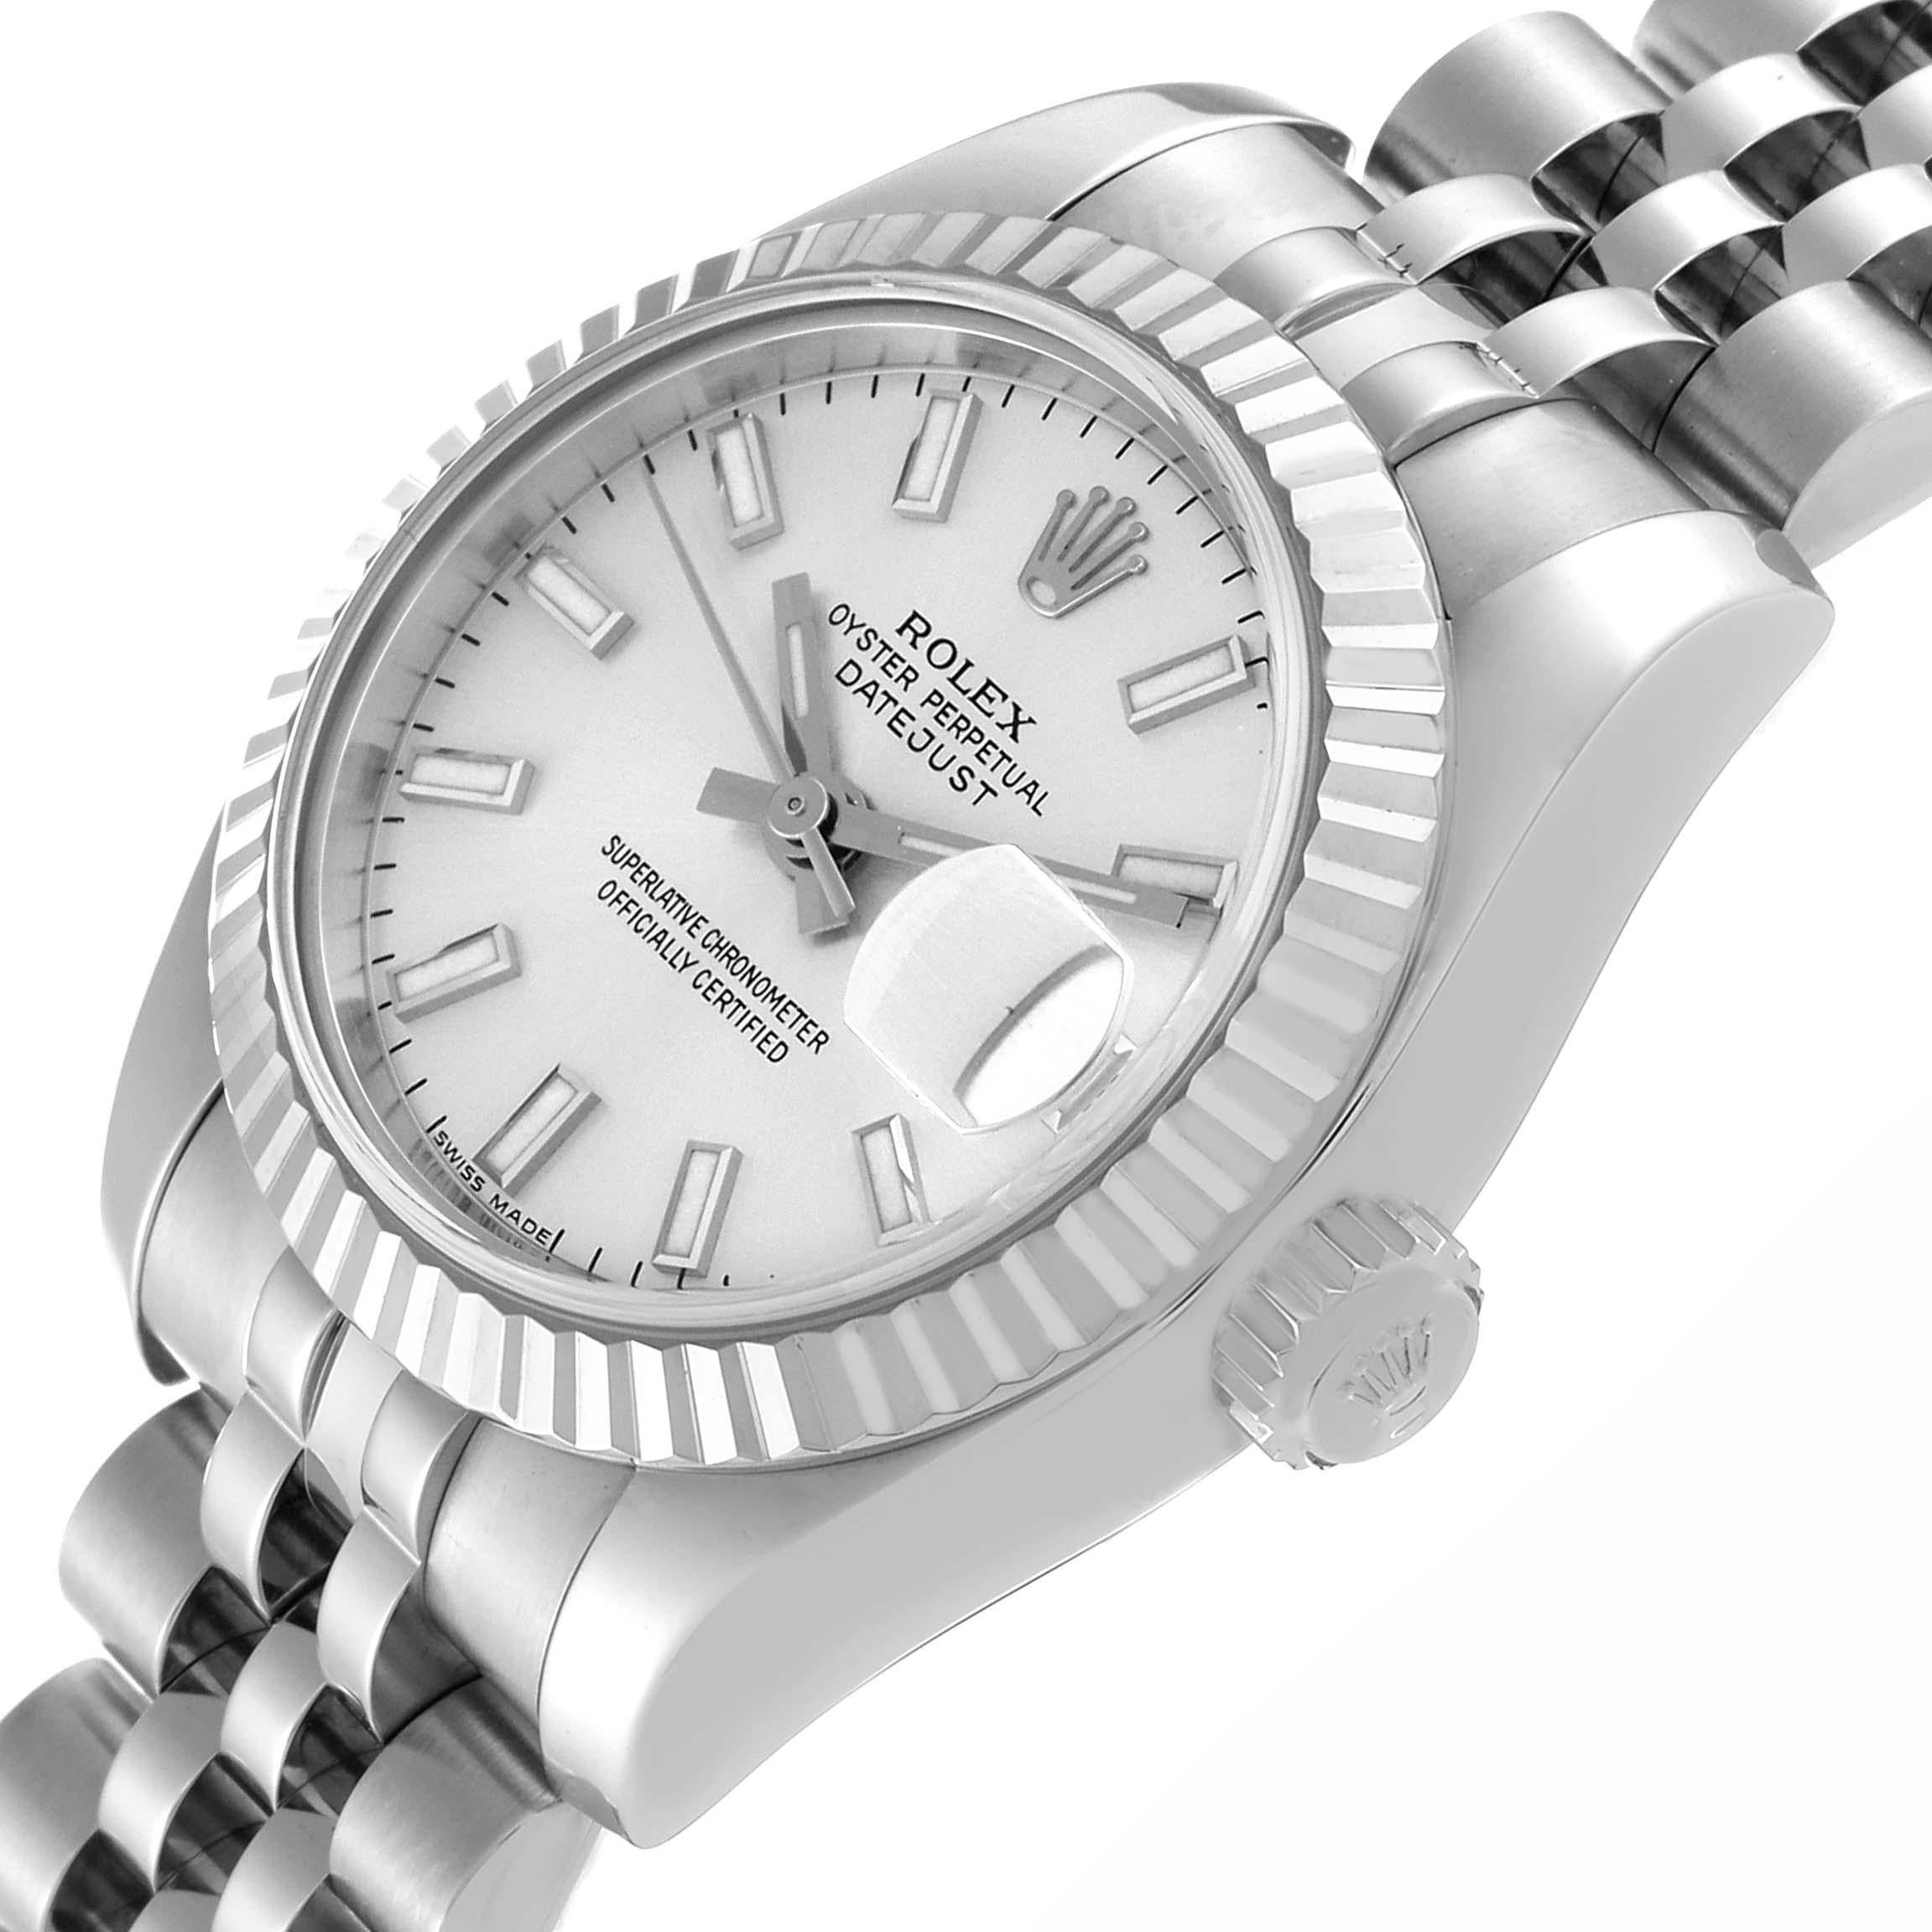 Rolex Datejust Steel White Gold Silver Dial Ladies Watch 179174 Box Papers en vente 3